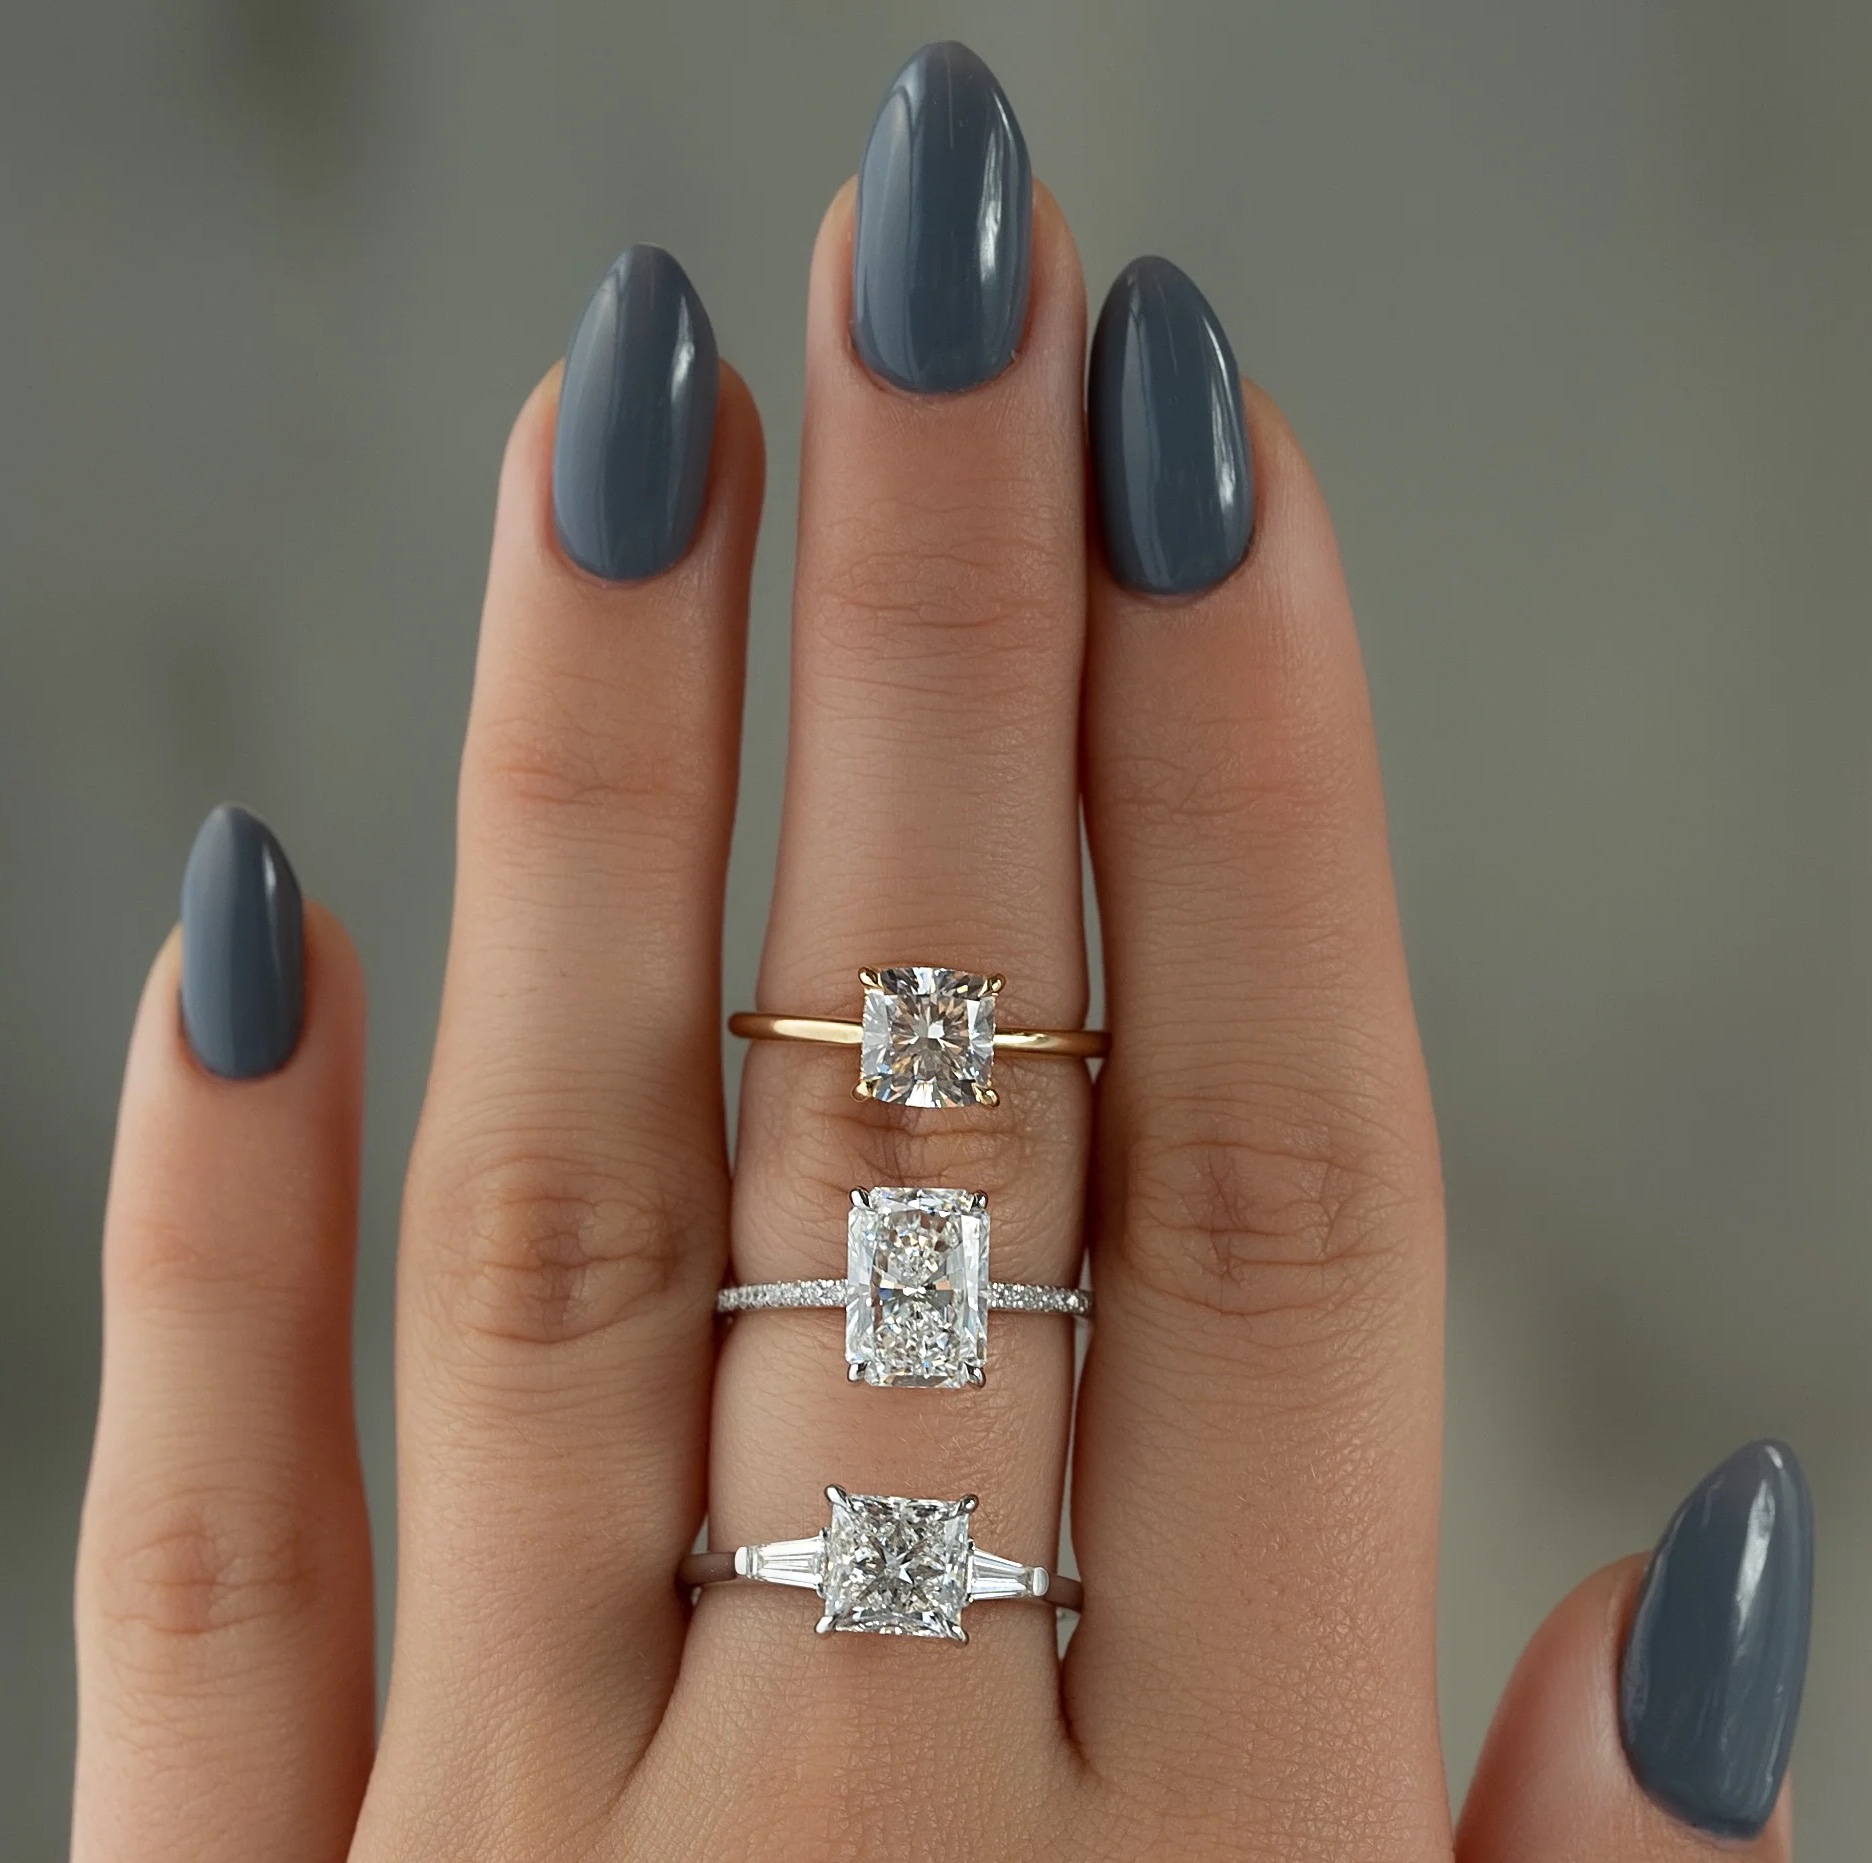 Which Diamonds Shape Sparkle The Most ?